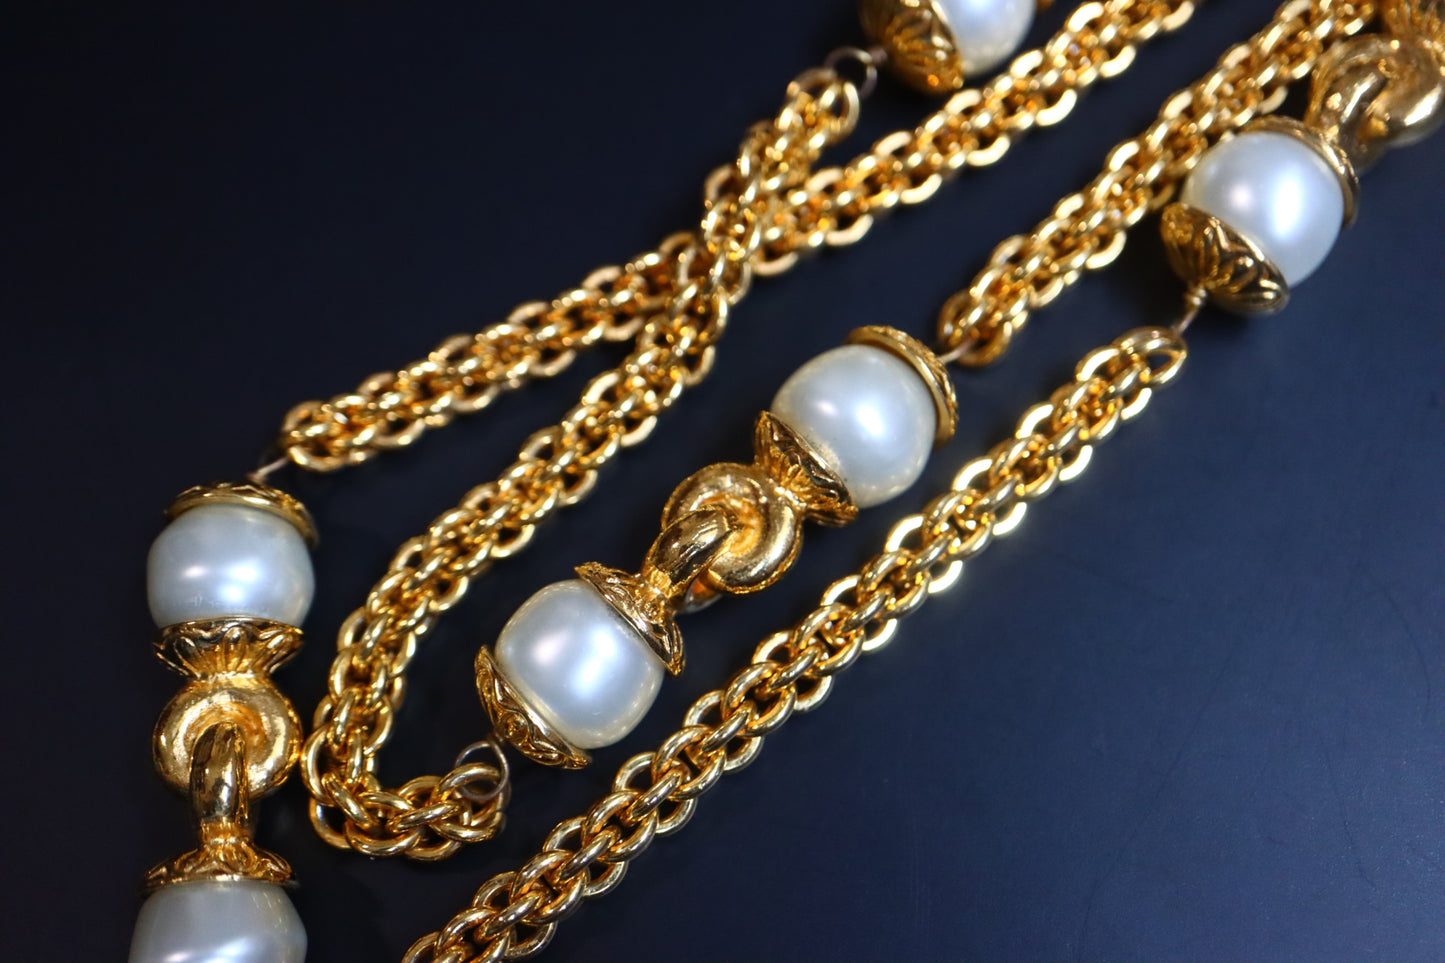 Vintage 1970s Chanel gold chain Pearls sautoir necklace